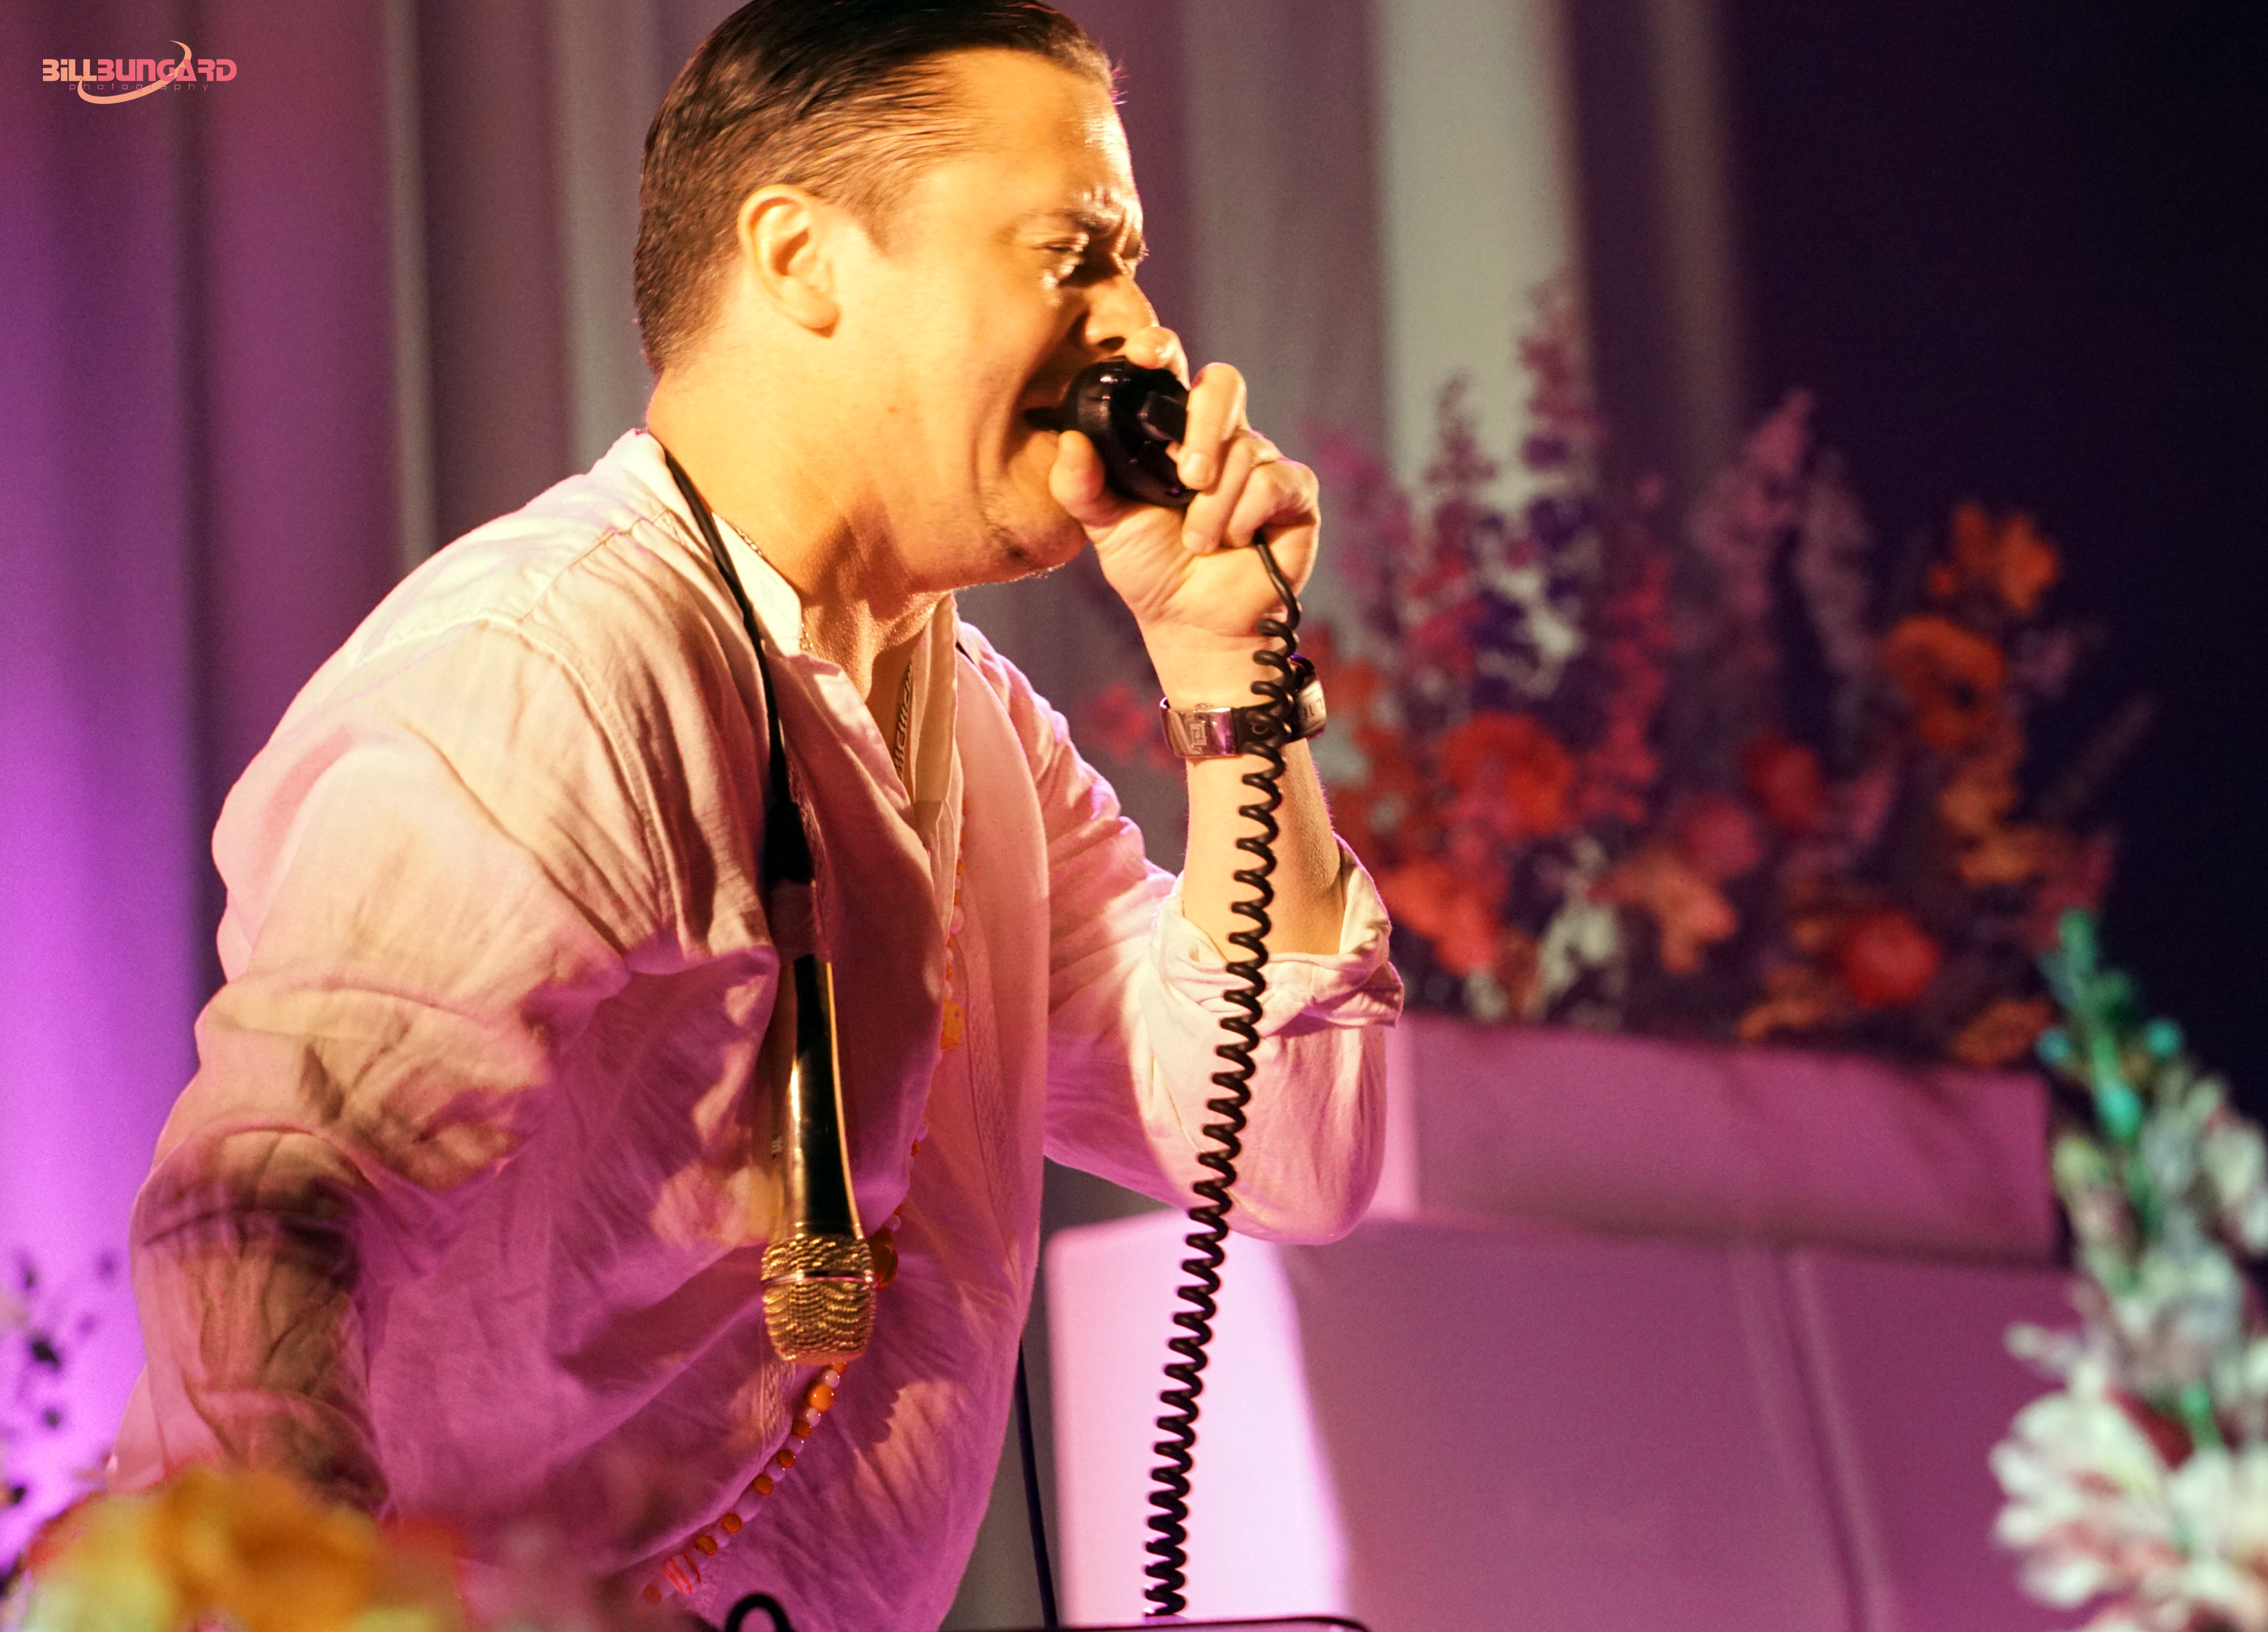 Mike Patton of Faith No More at The Paramount (Photo by Bill Bungard)